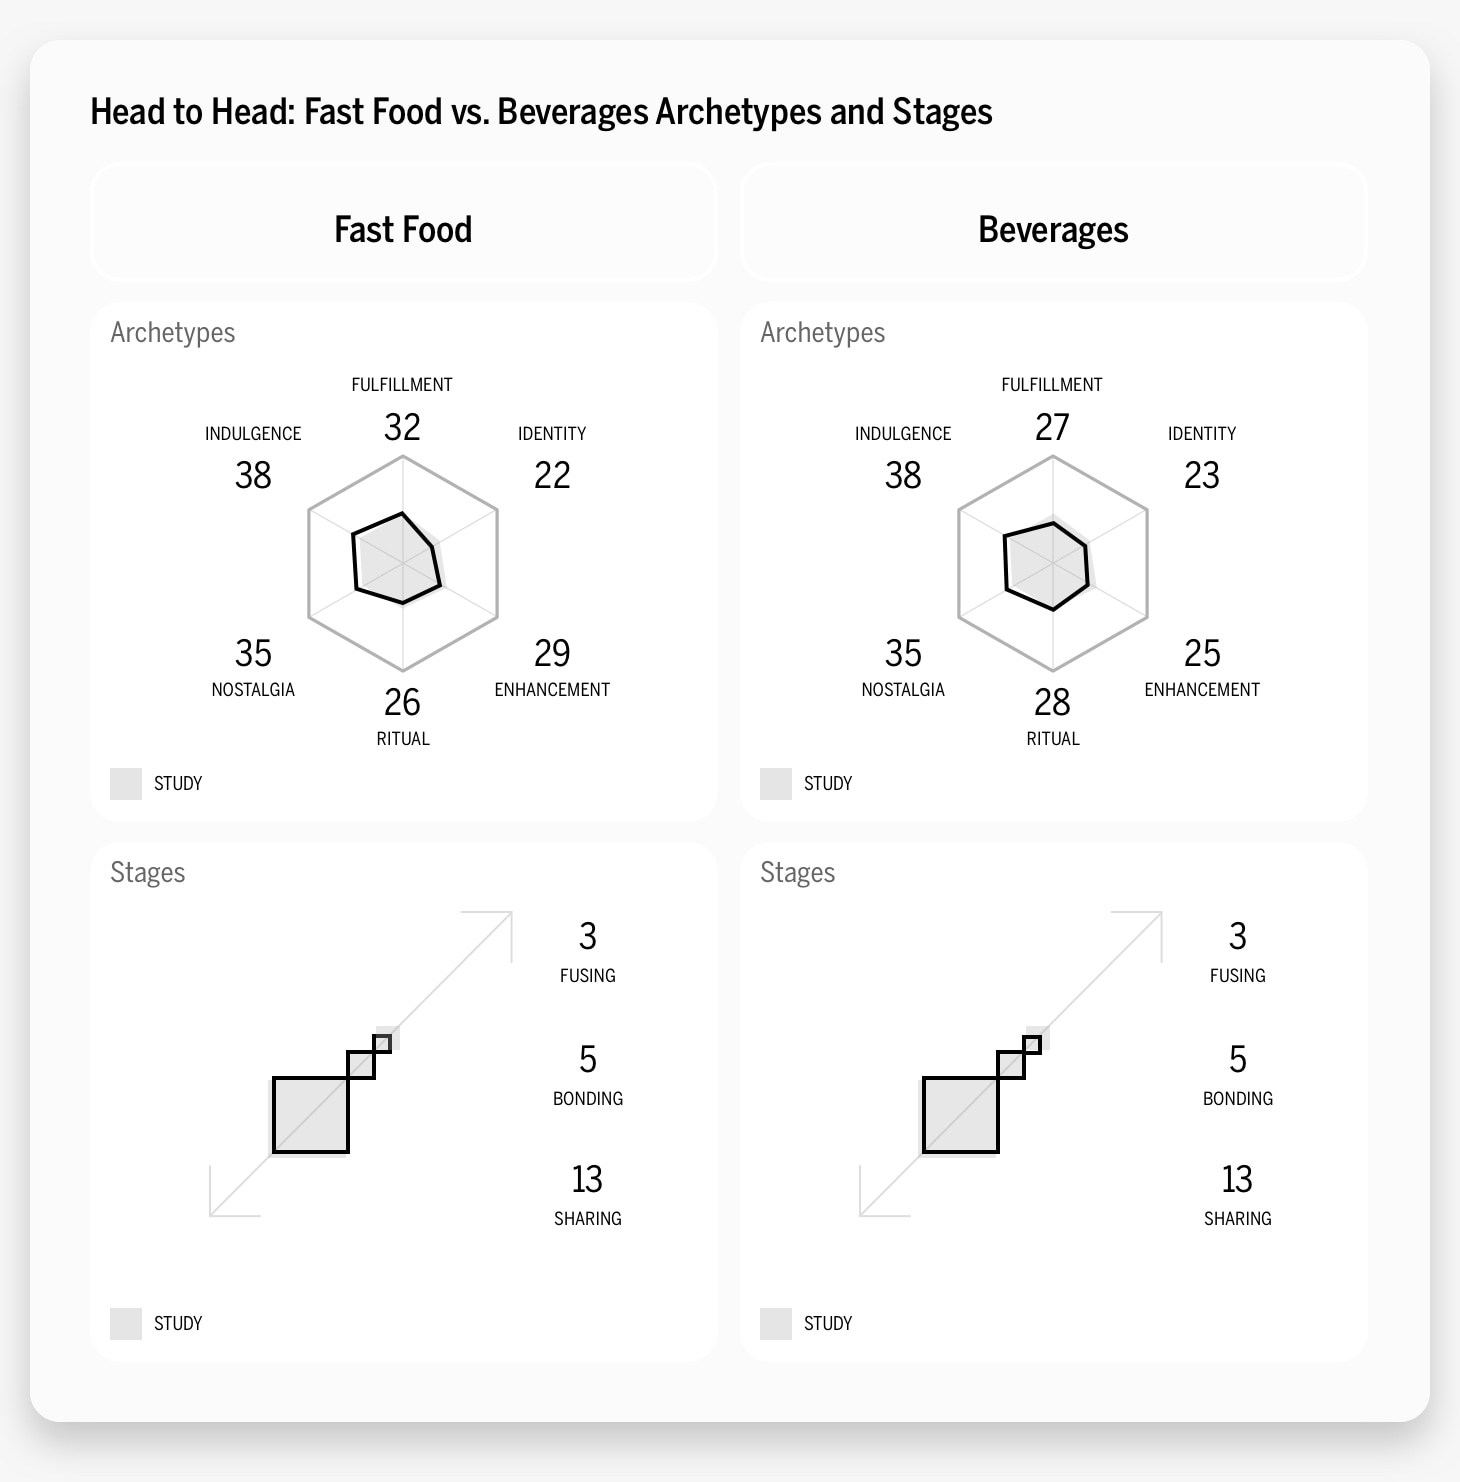 Head to head food vs beverage analysis and stages.